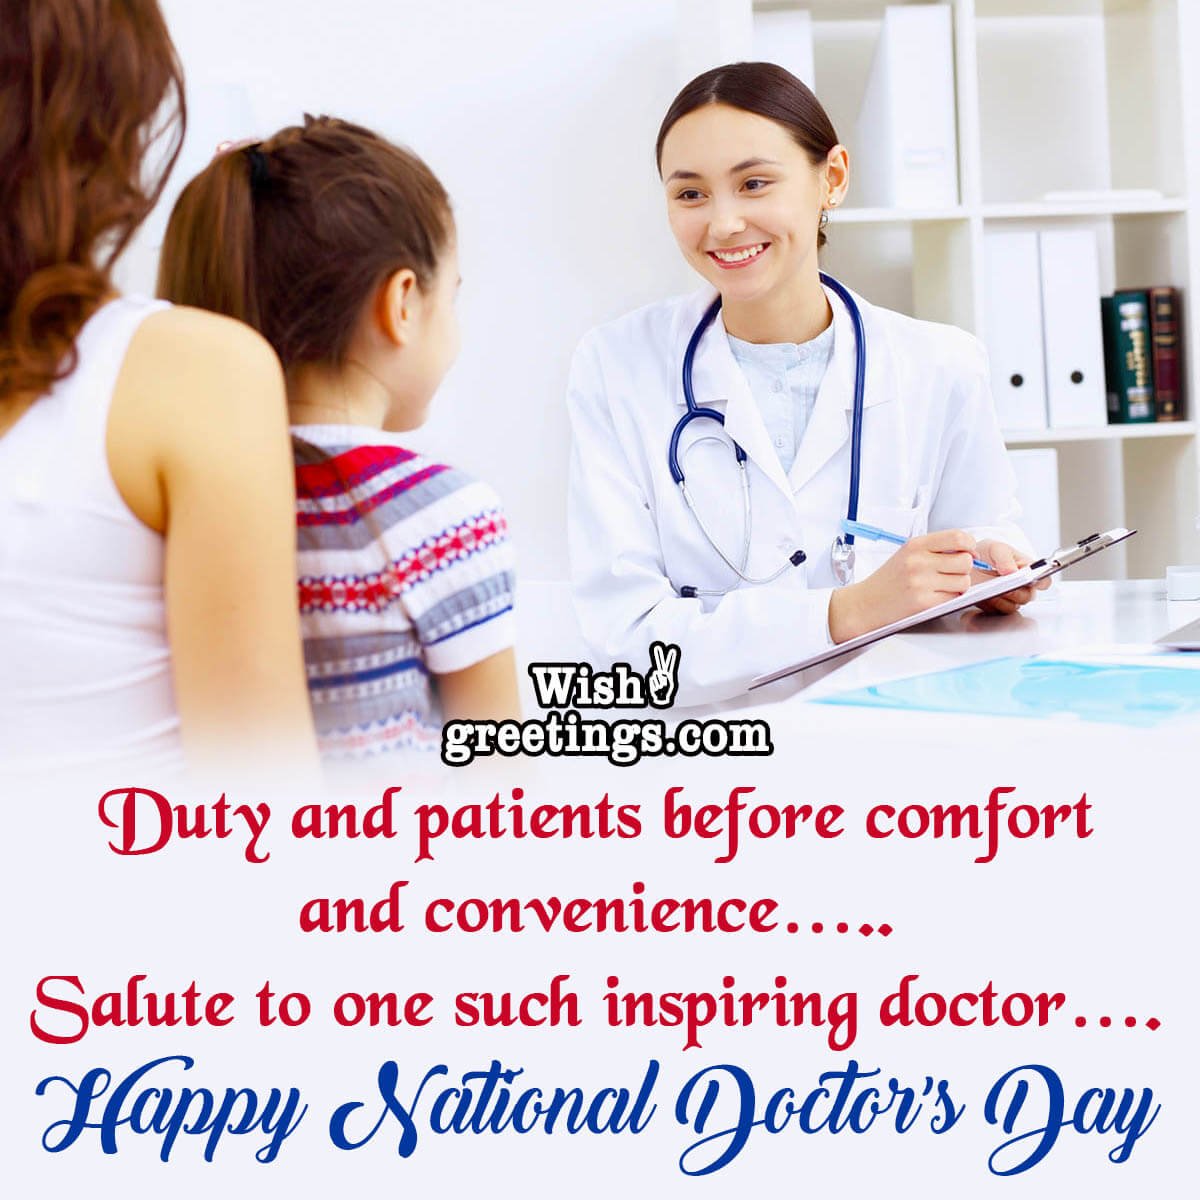 Happy National Doctor’s Day